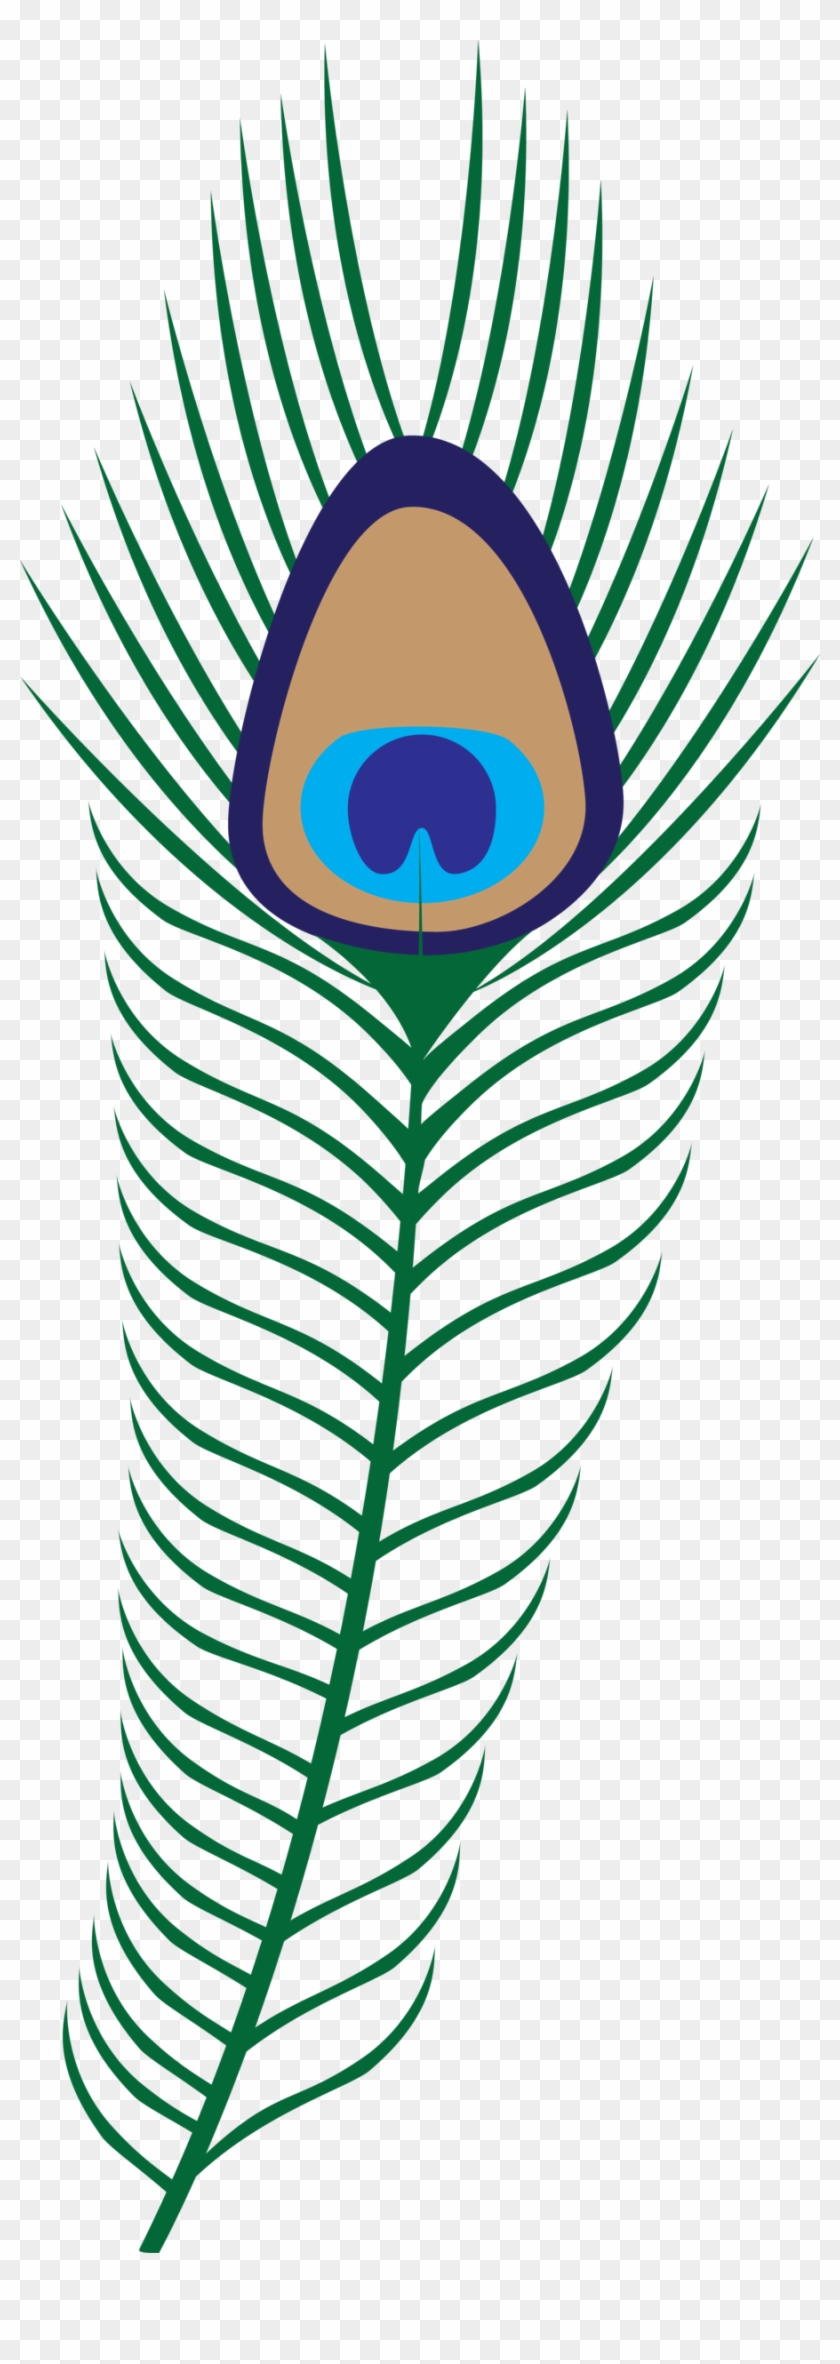 Cartoon Peacock Feathers - Transparent Background Png Format Peacock Feathers Clipart #476394